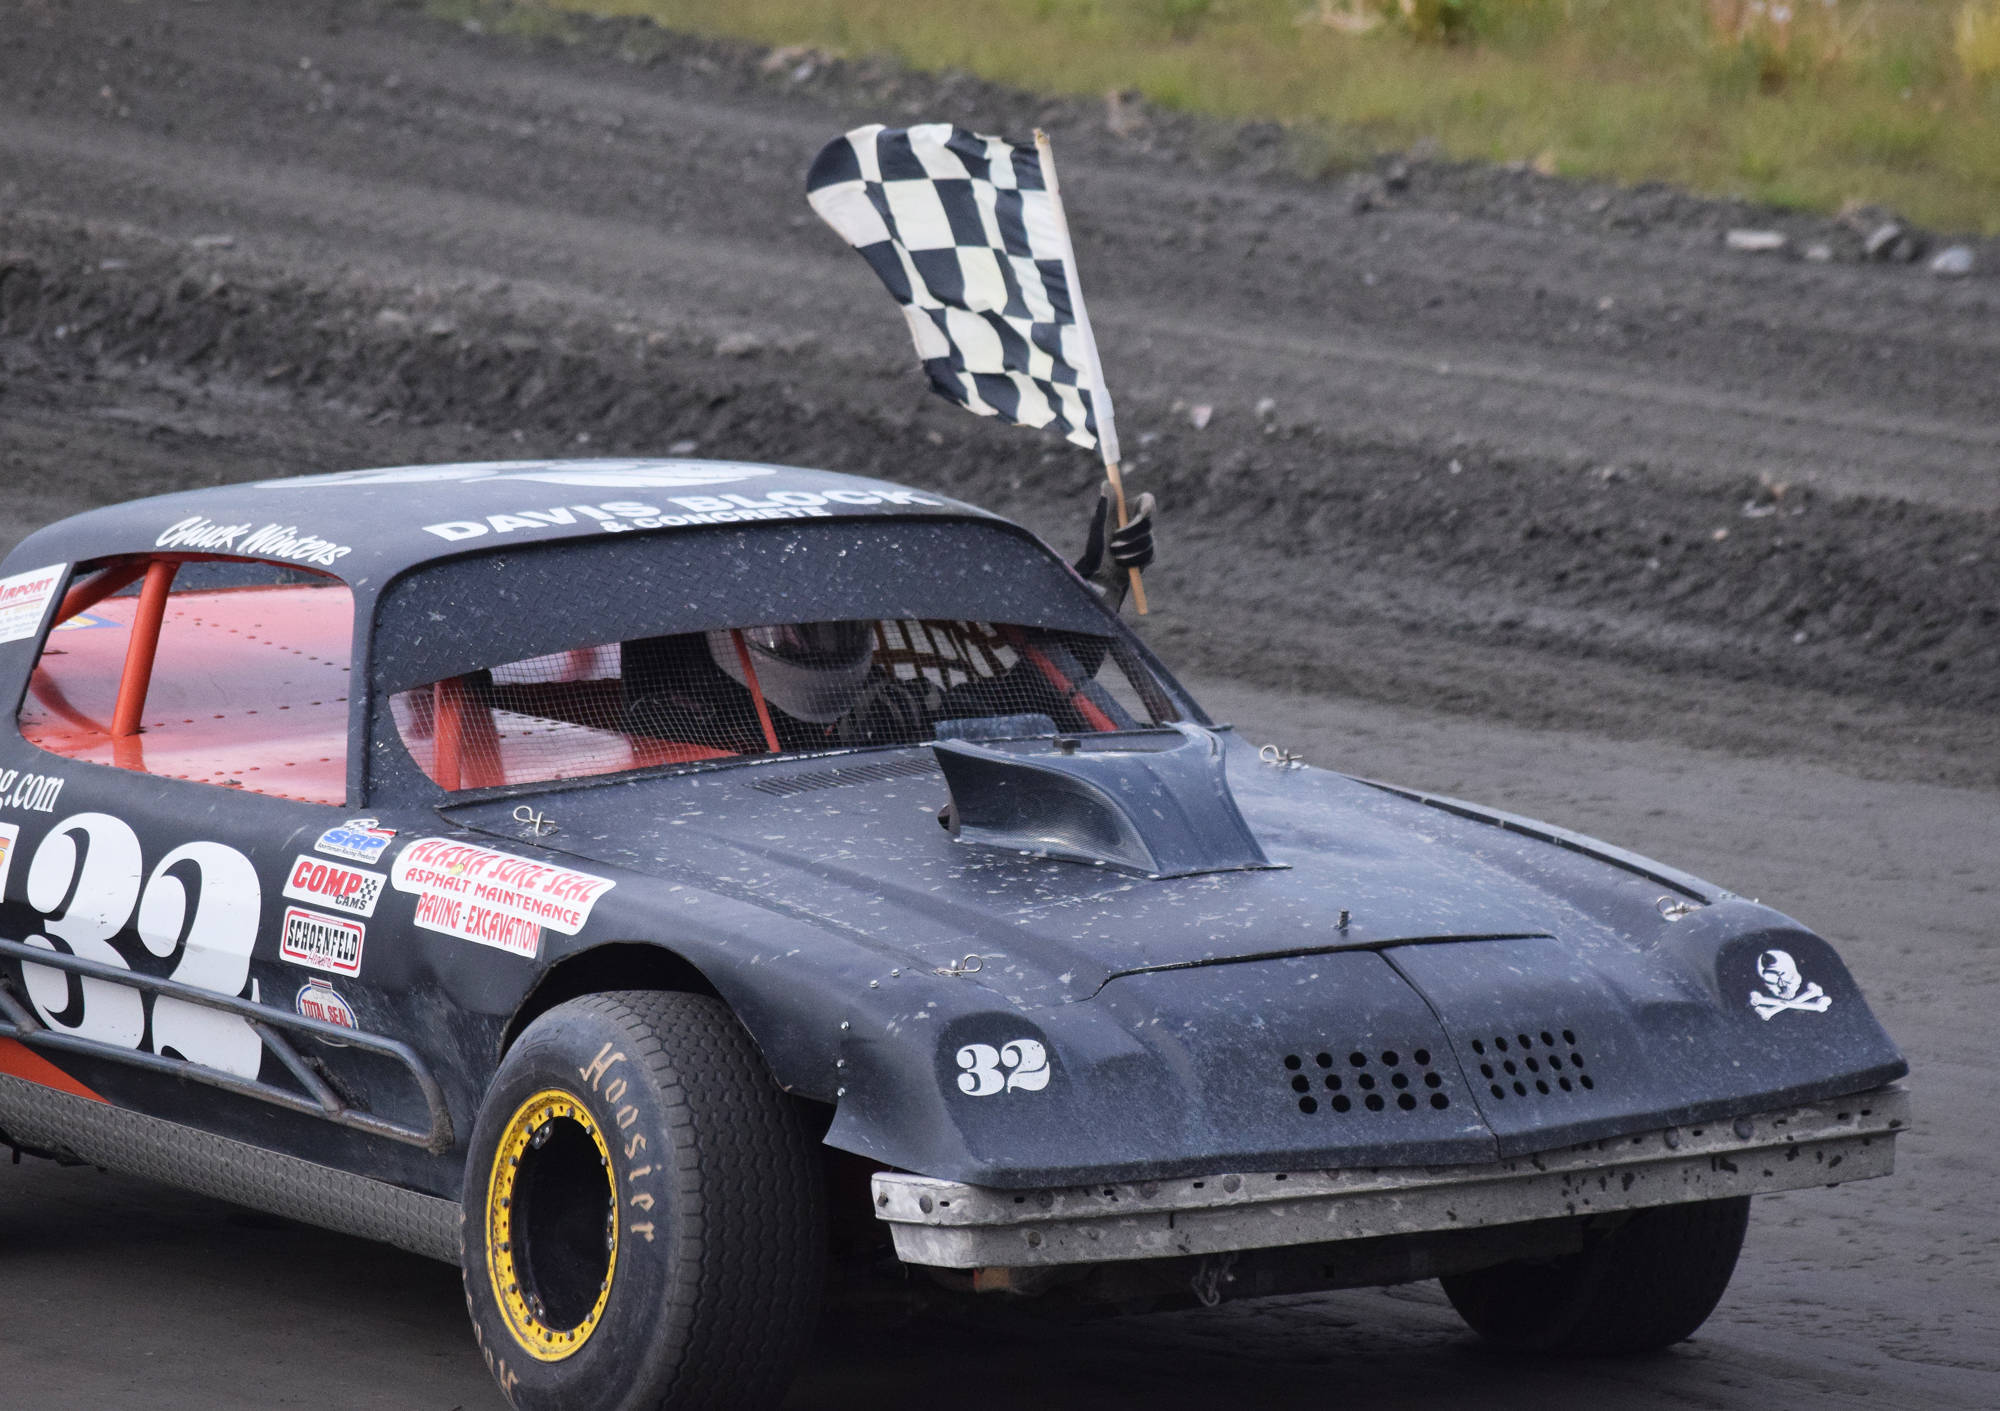 B-Stock driver Chuck Winters takes the checkered flag for a victory lap after winning the 50-lap “Filthy Fifty” feature race Saturday night at Twin City Raceway in Kenai. (Photo by Joey Klecka/Peninsula Clarion)